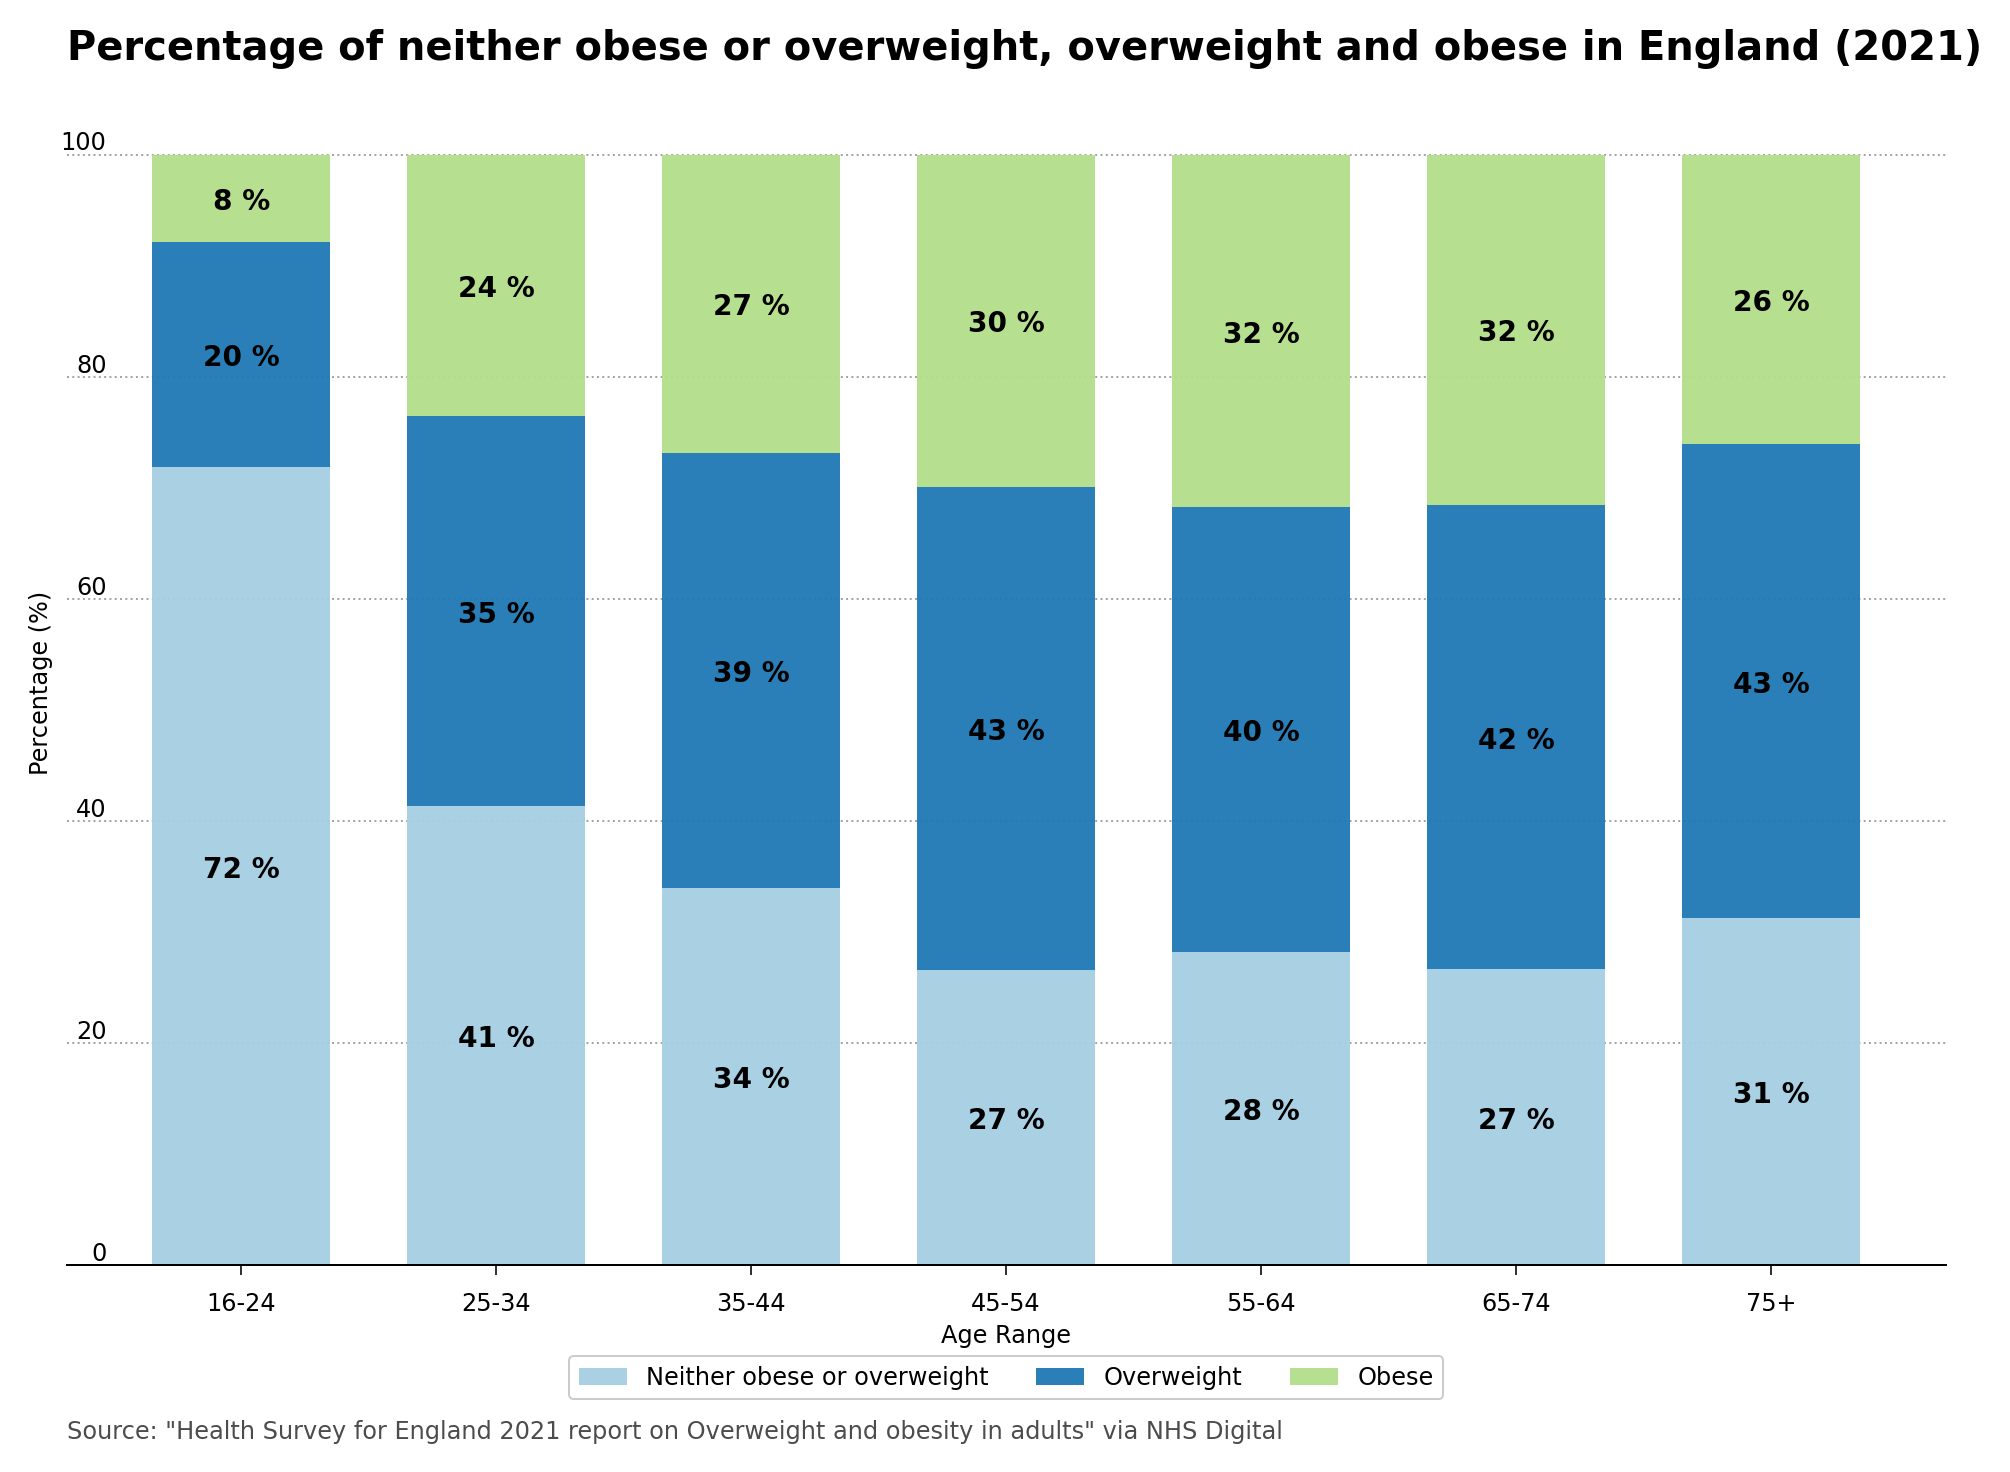 Percentage of neither obese or overweight, overweight and obese in England (2021)